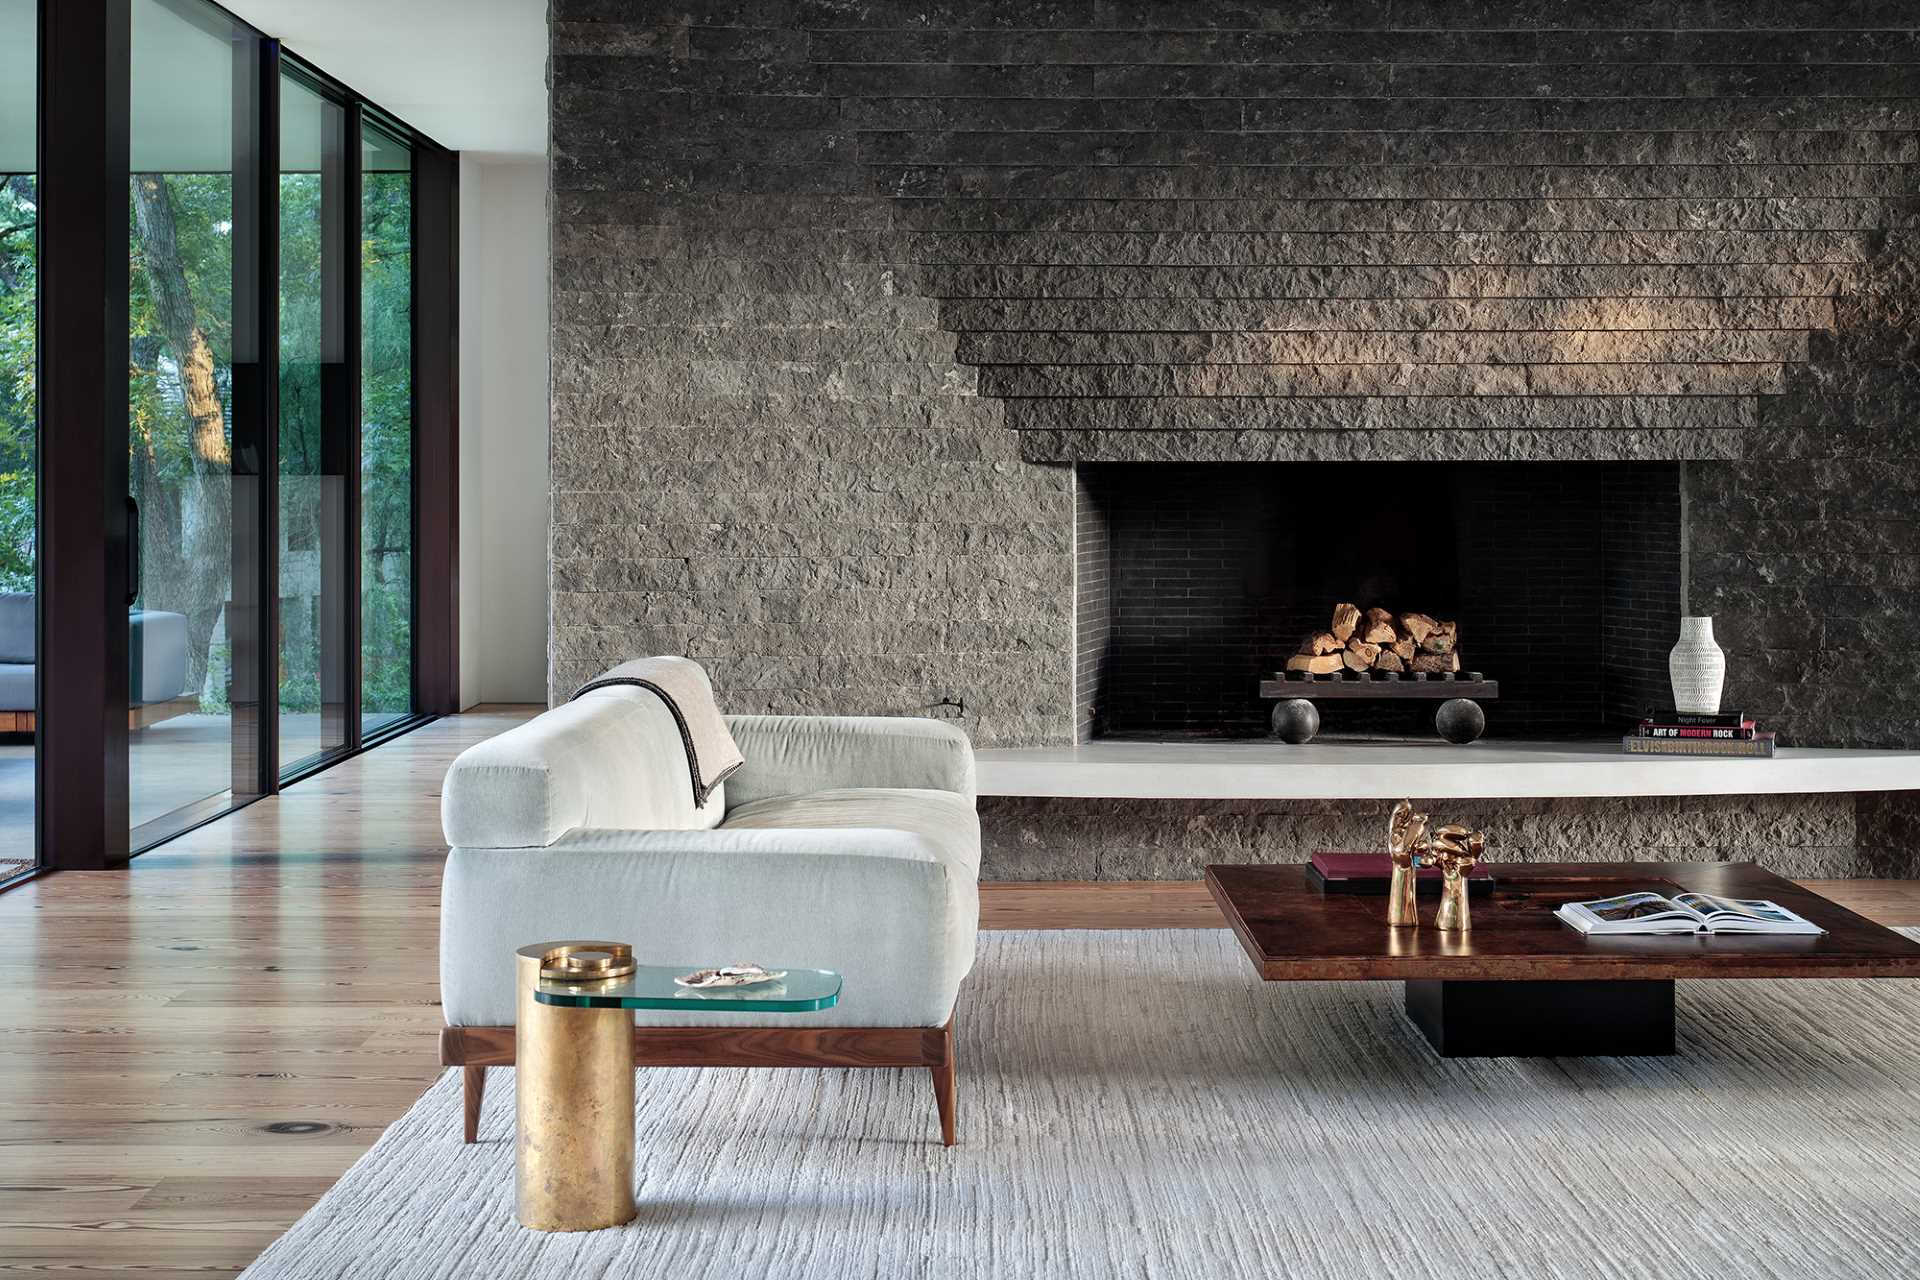 The living room is anchored by a sculptural charcoal limestone fireplace, while a tray ceiling unifies and accentuates the living and dining areas. The floors are surfaced with wide planks of reclaimed long-leaf pine.